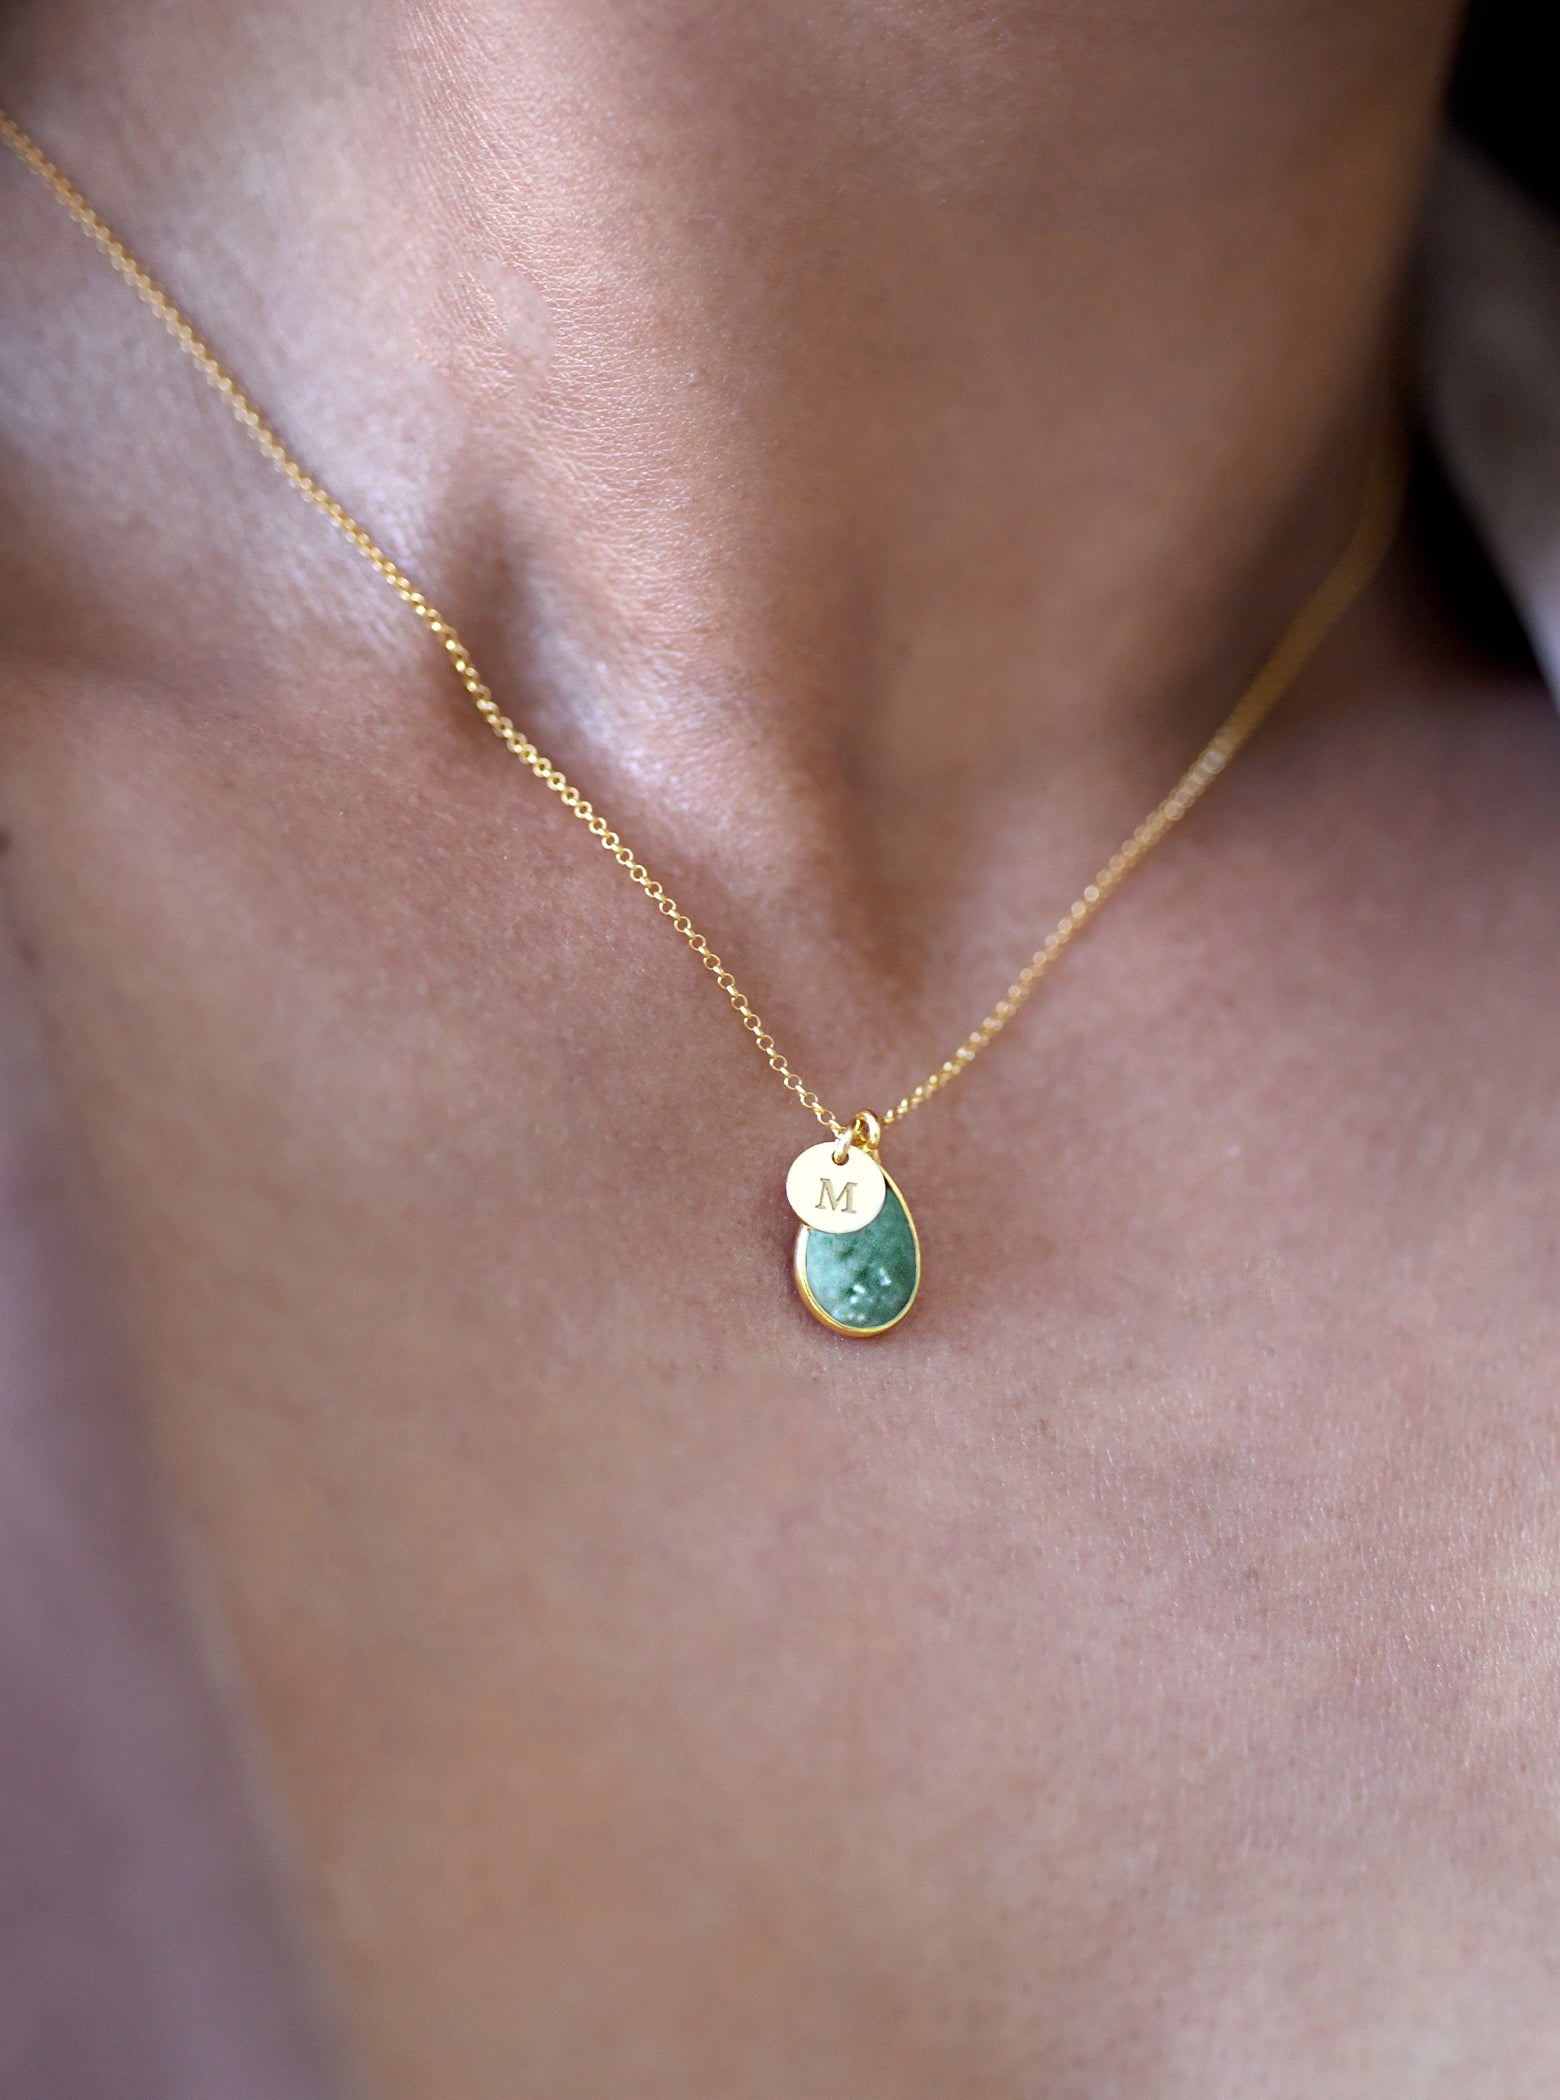 Oval Initial Gemstone Necklace, Gold initial necklace, initial pendant  necklace, bridesmaid gift, birthstone necklace, natural gemstone